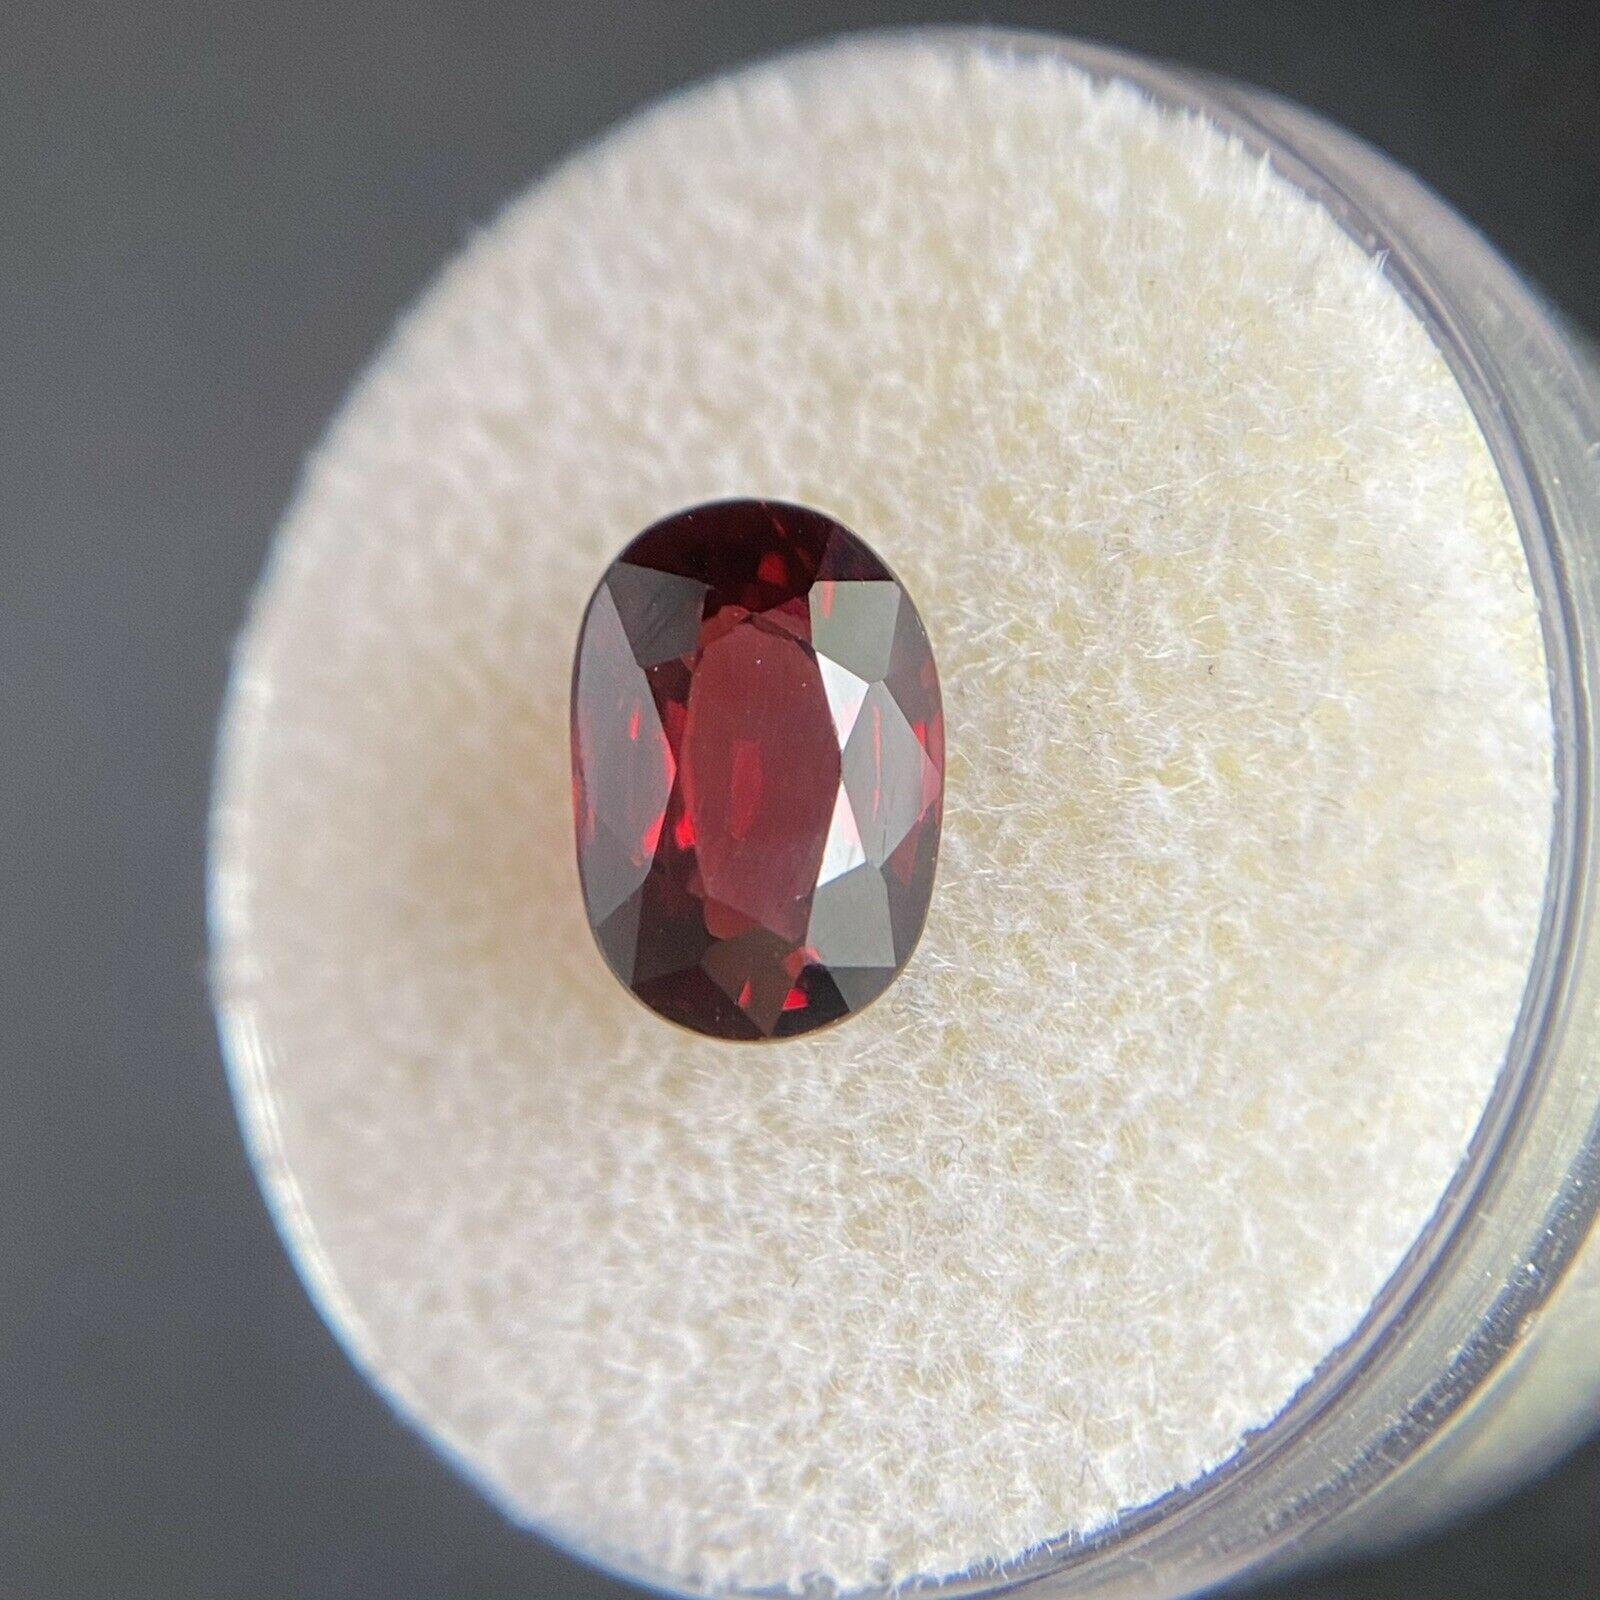 Natural 2.50ct Purple Red Rhodolite Garnet Oval Cut Loose Gem 9.5 x 6.5mm

Natural Loose Rhodolite Garnet Gem. 
2.50 Carat with a beautiful vivid purplish red colour and excellent clarity, a clean stone with only some small natural inclusions